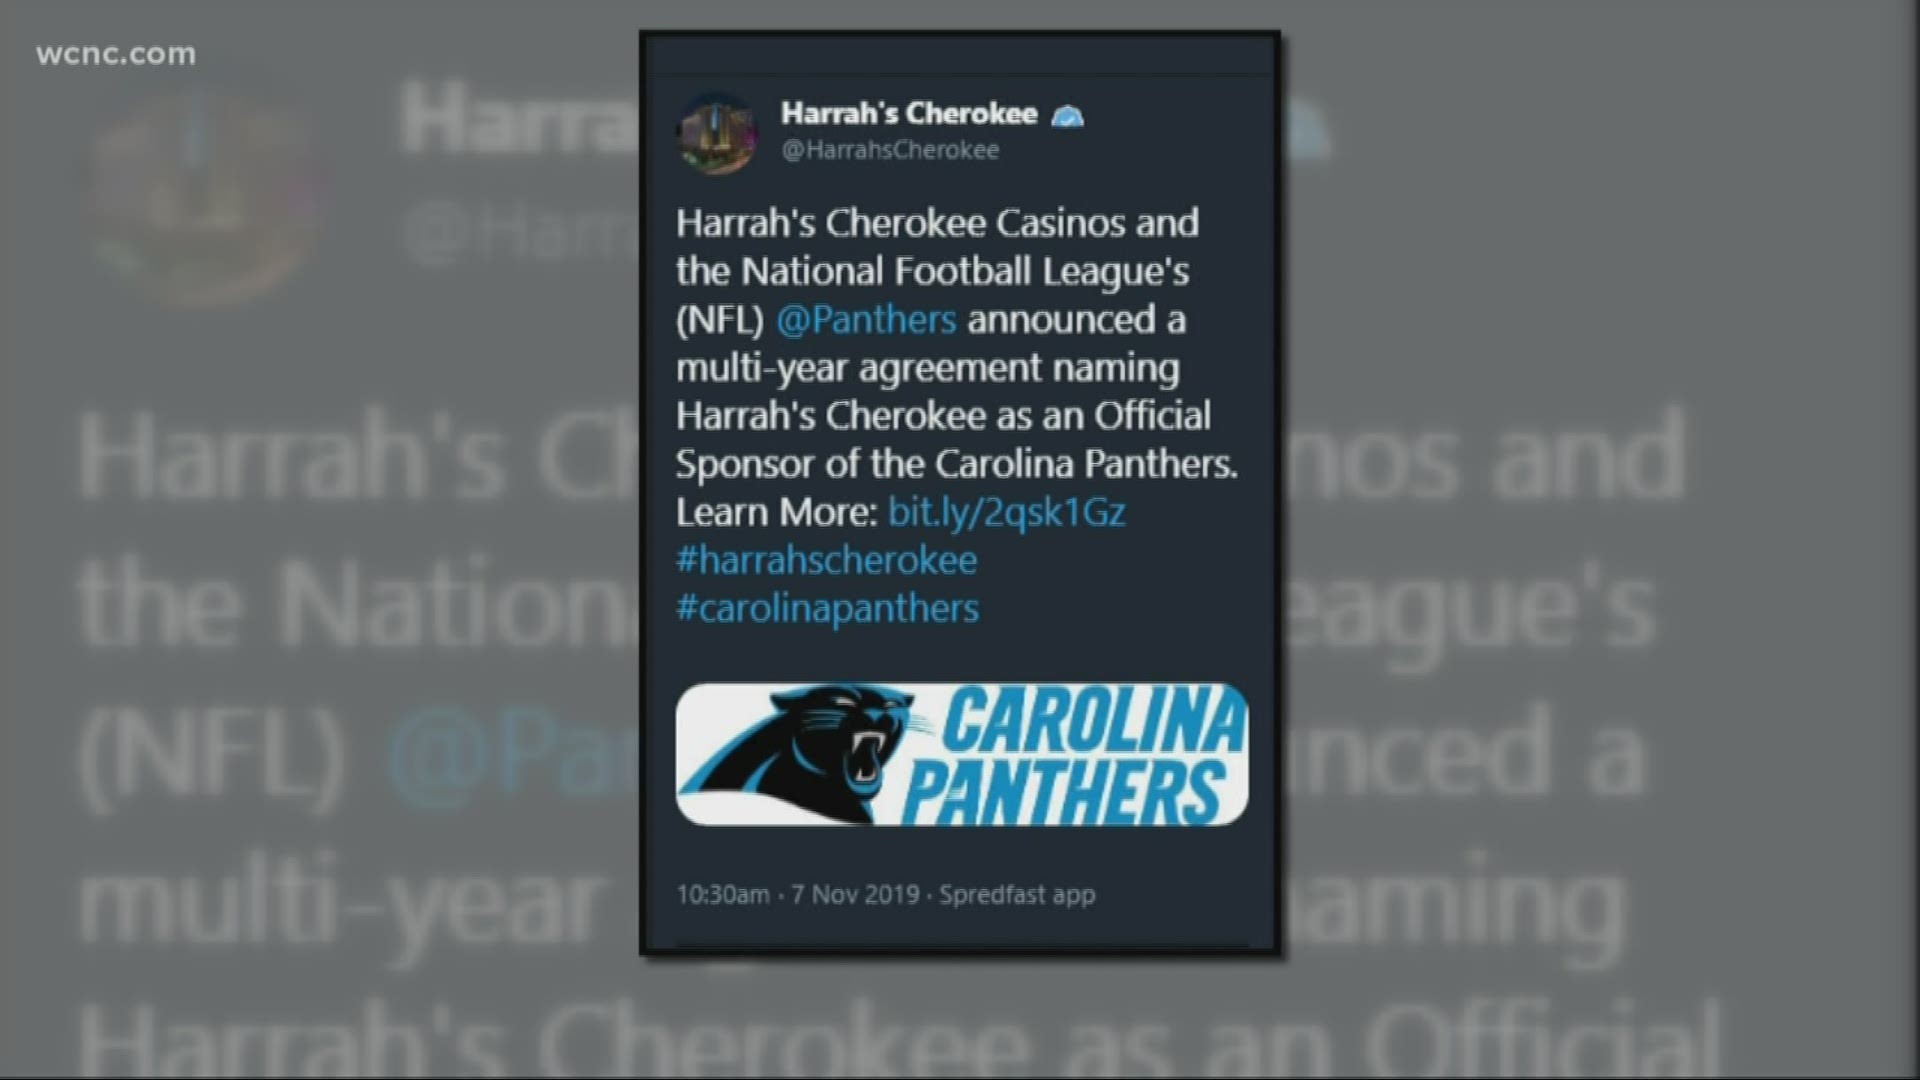 The agreement lets the casino provide prizes for the Panthers Pick'em game through the Panthers mobile app.